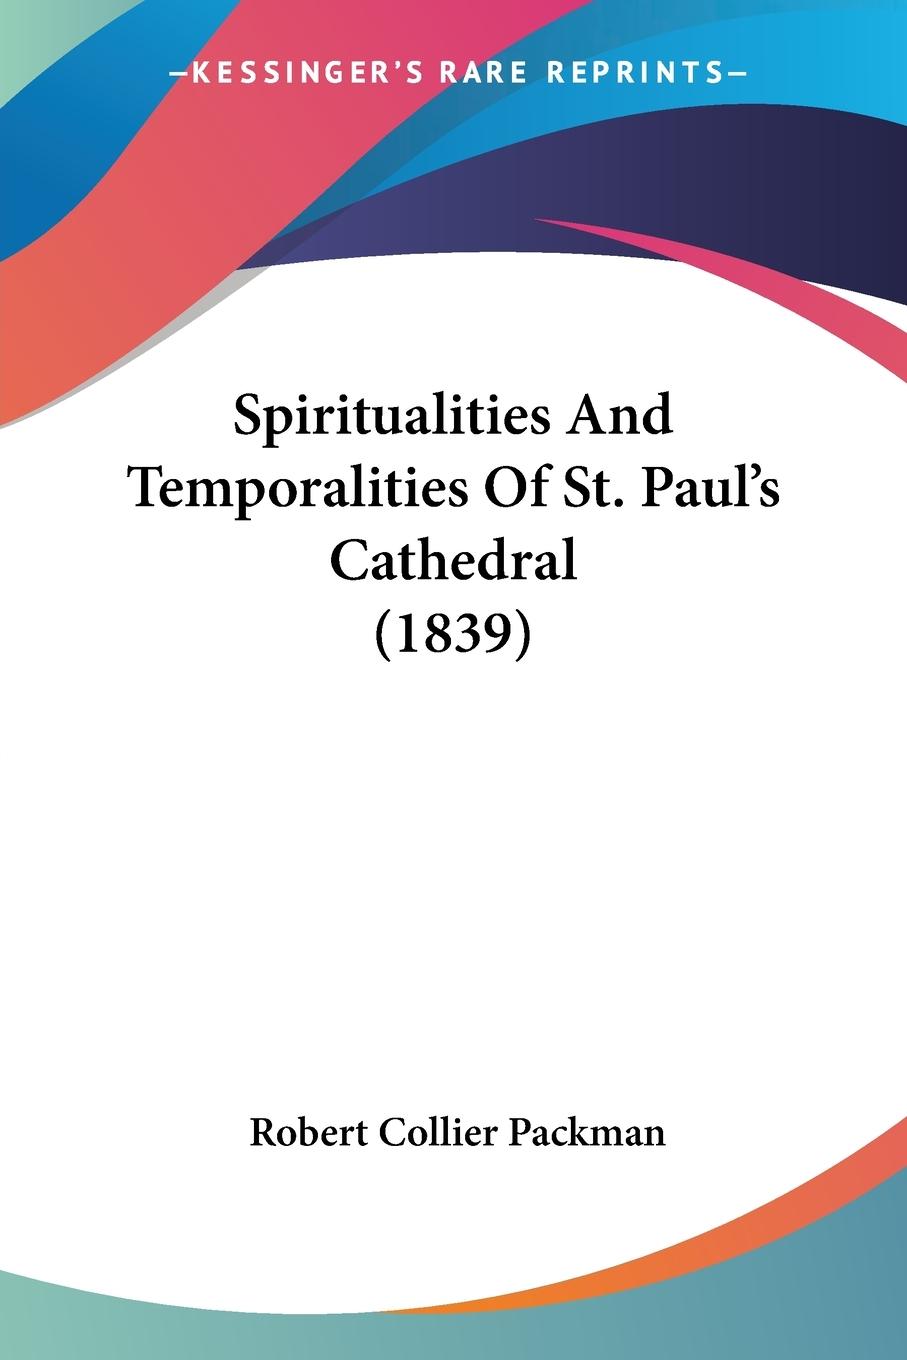 Spiritualities And Temporalities Of St. Paul s Cathedral (1839) - Packman, Robert Collier